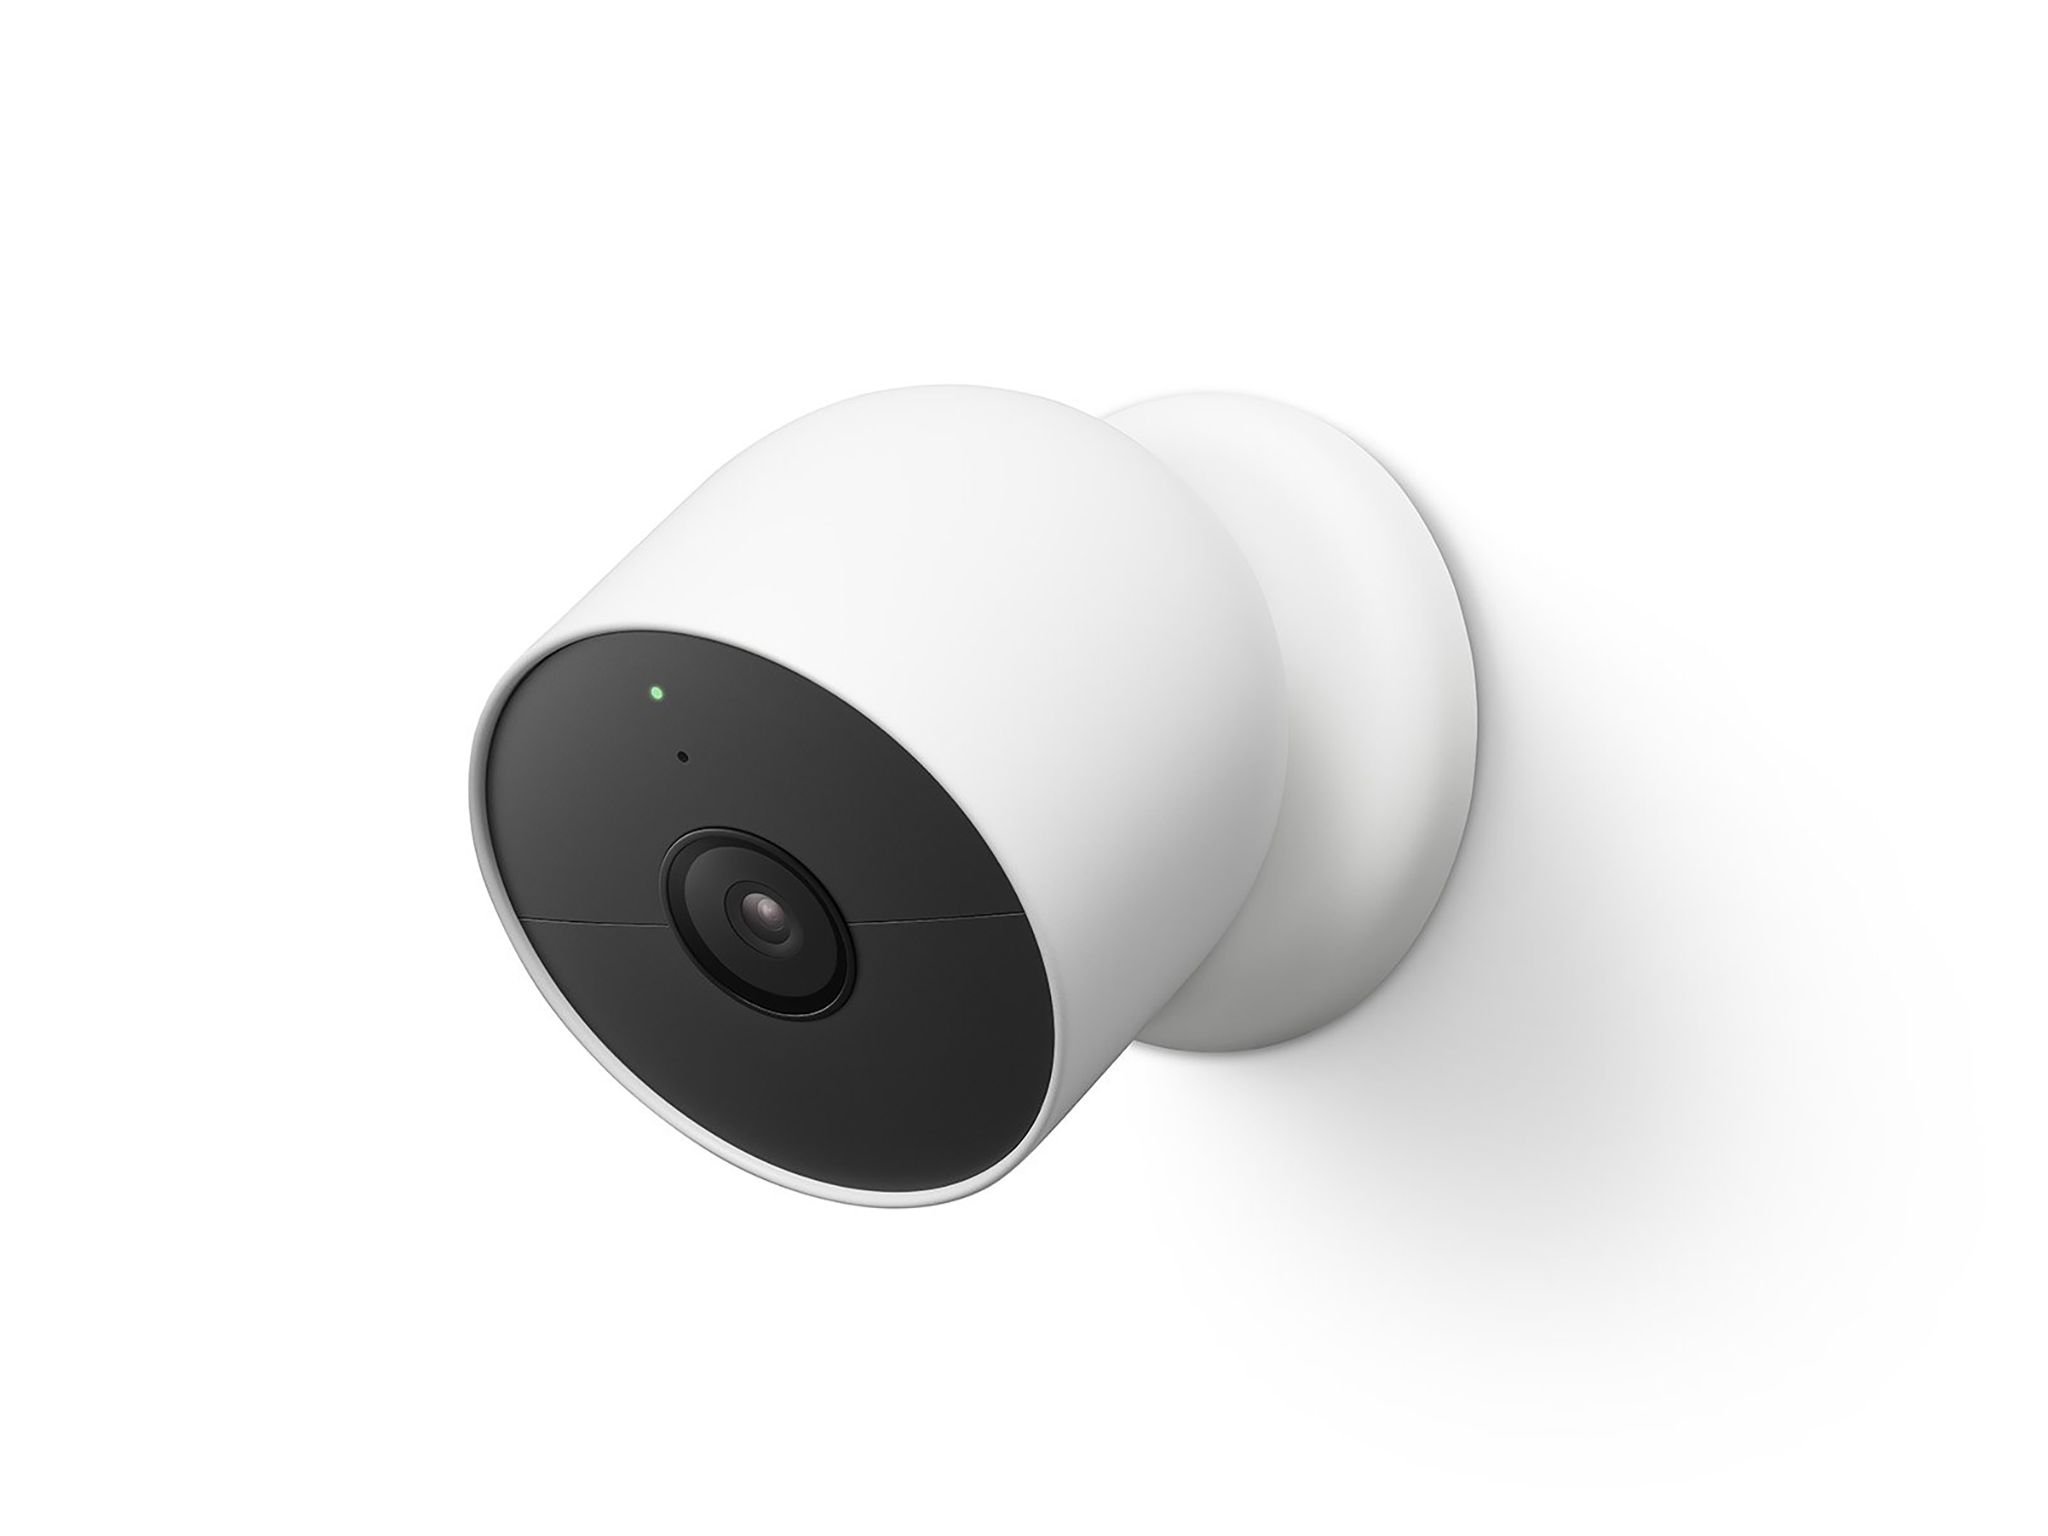 Google Nest cam (outdoor or indoor) security camera (two-pack)